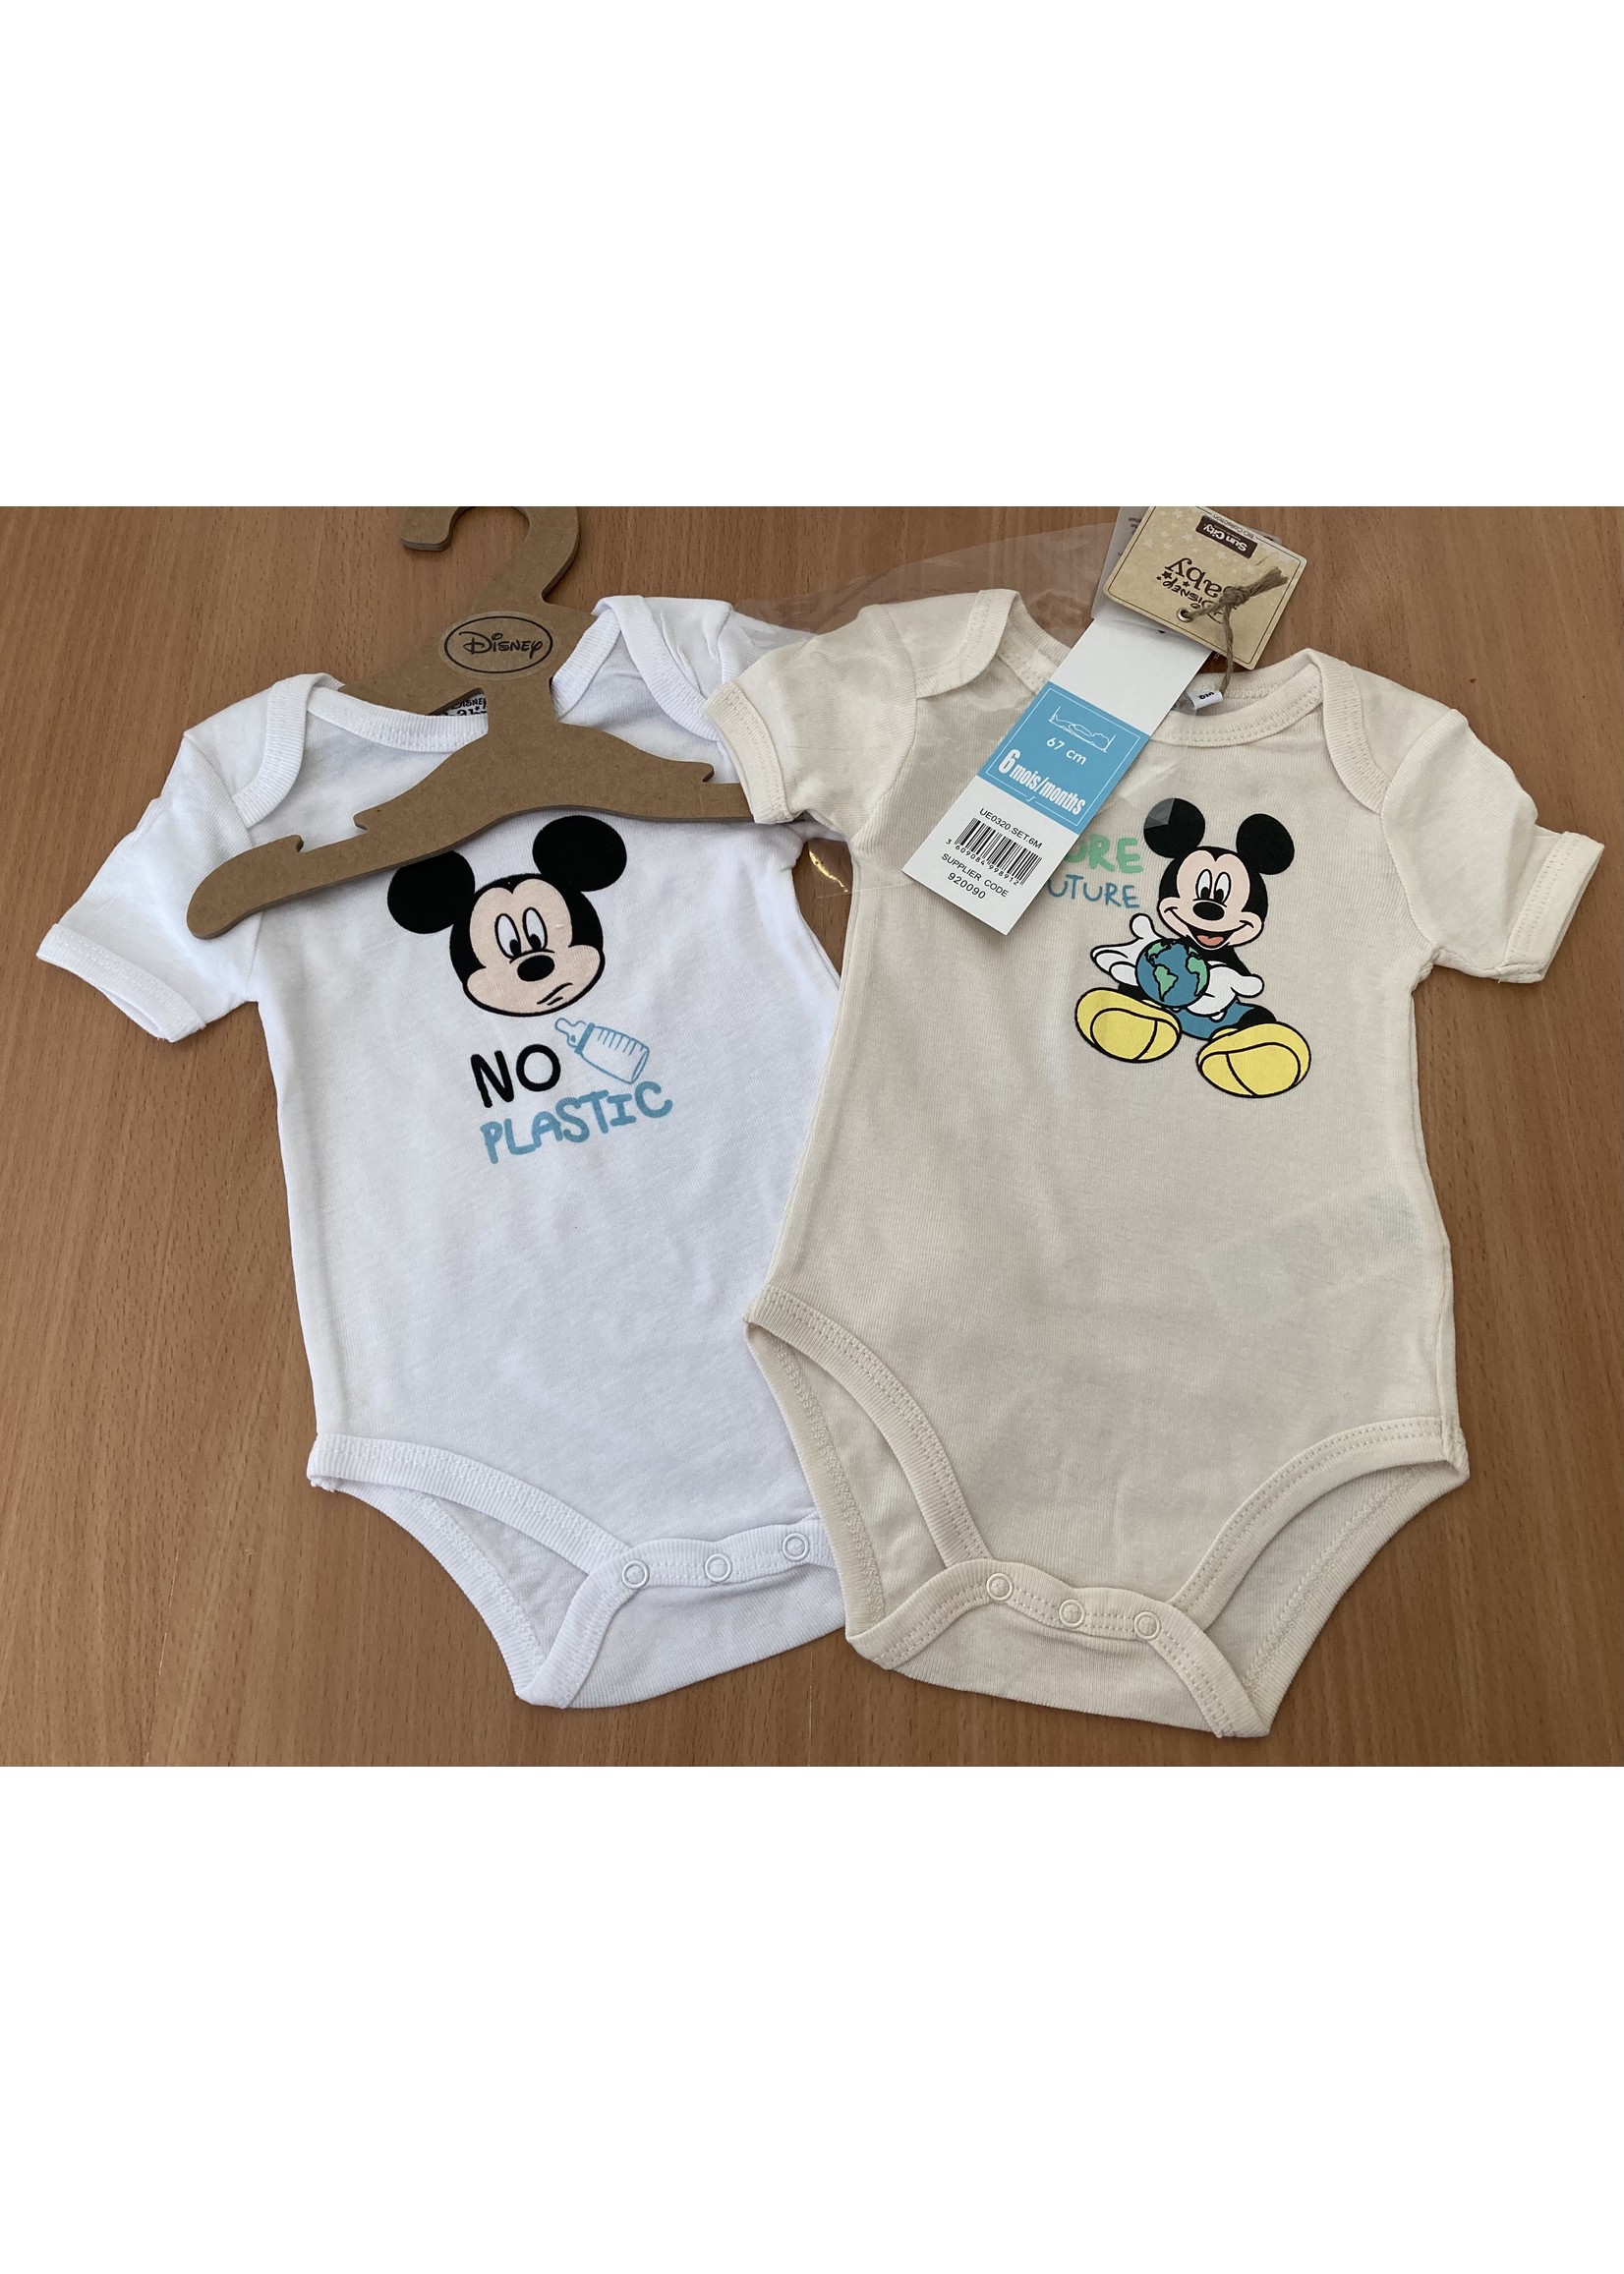 Disney baby Mickey Mouse organic rompers from Disney baby 2 pack